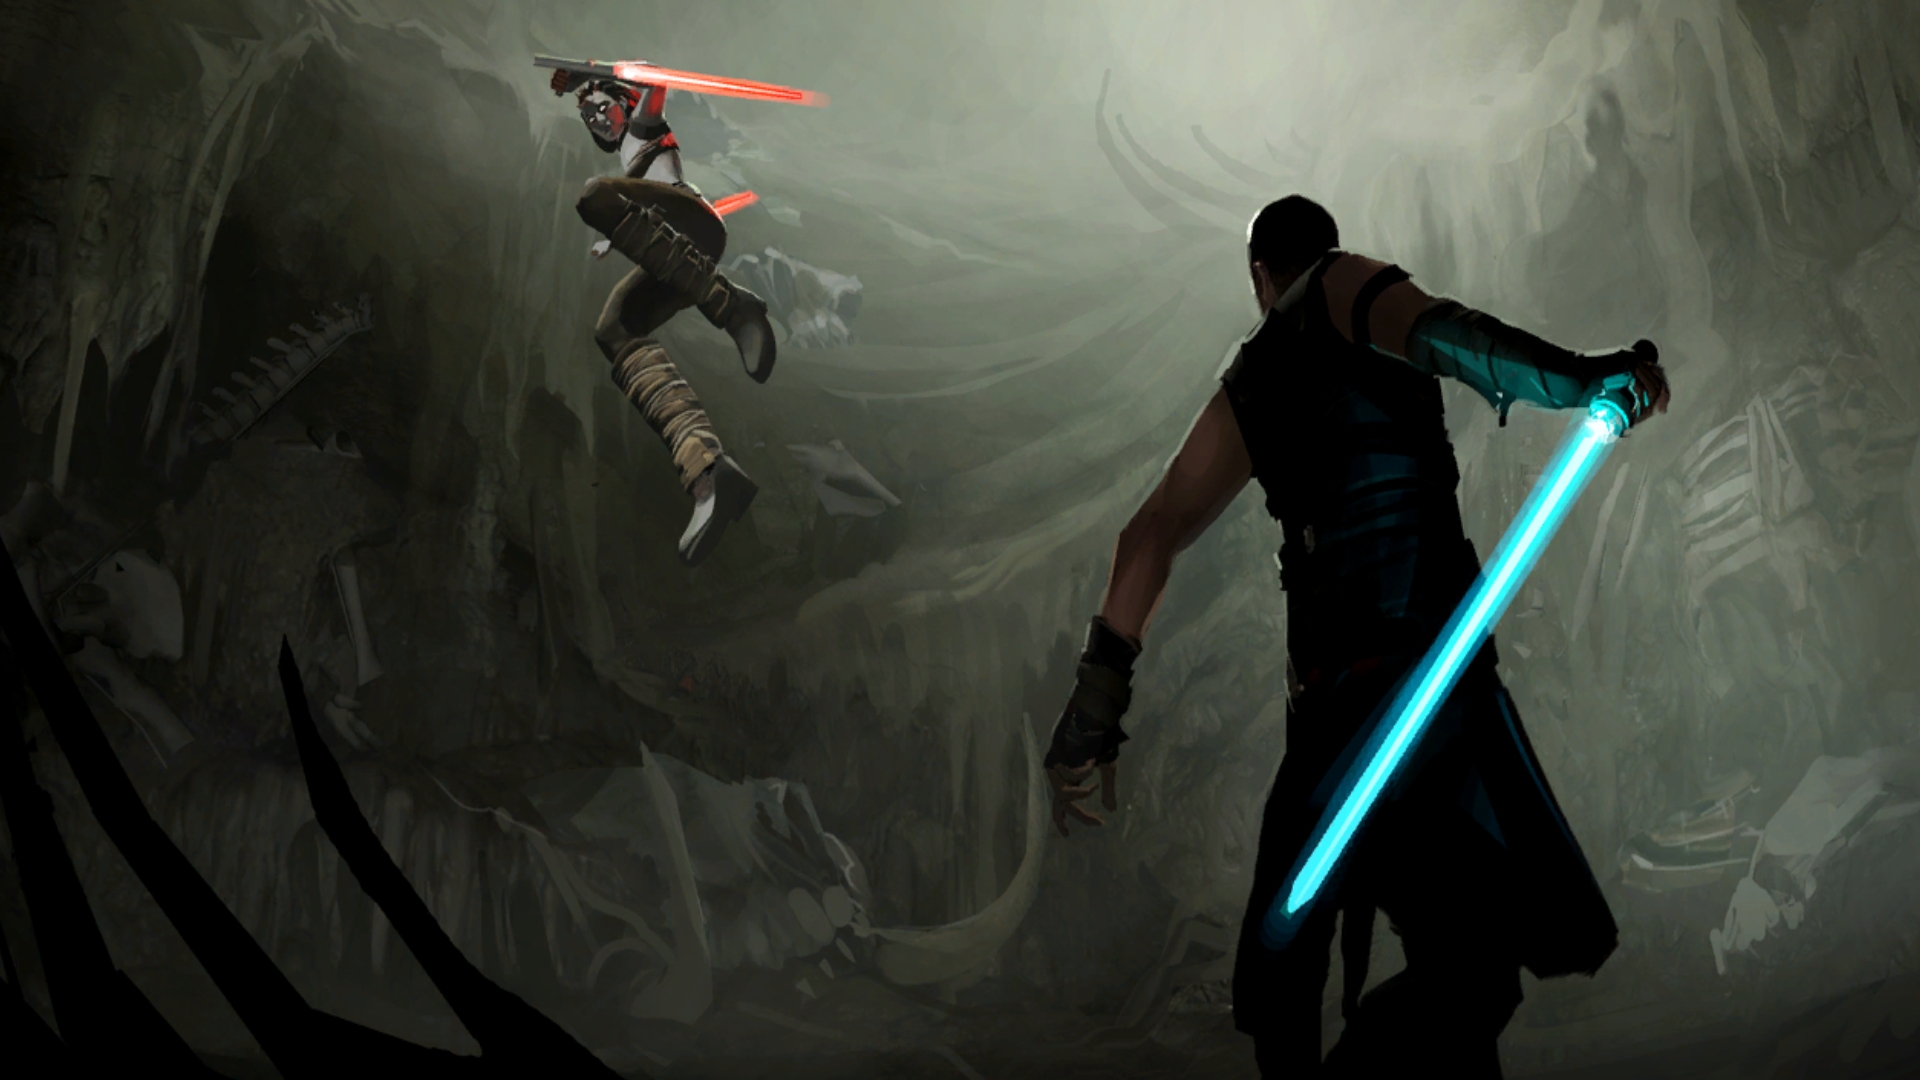 Star Wars, outer space, Star Wars: The Force Unleashed - desktop wallpaper